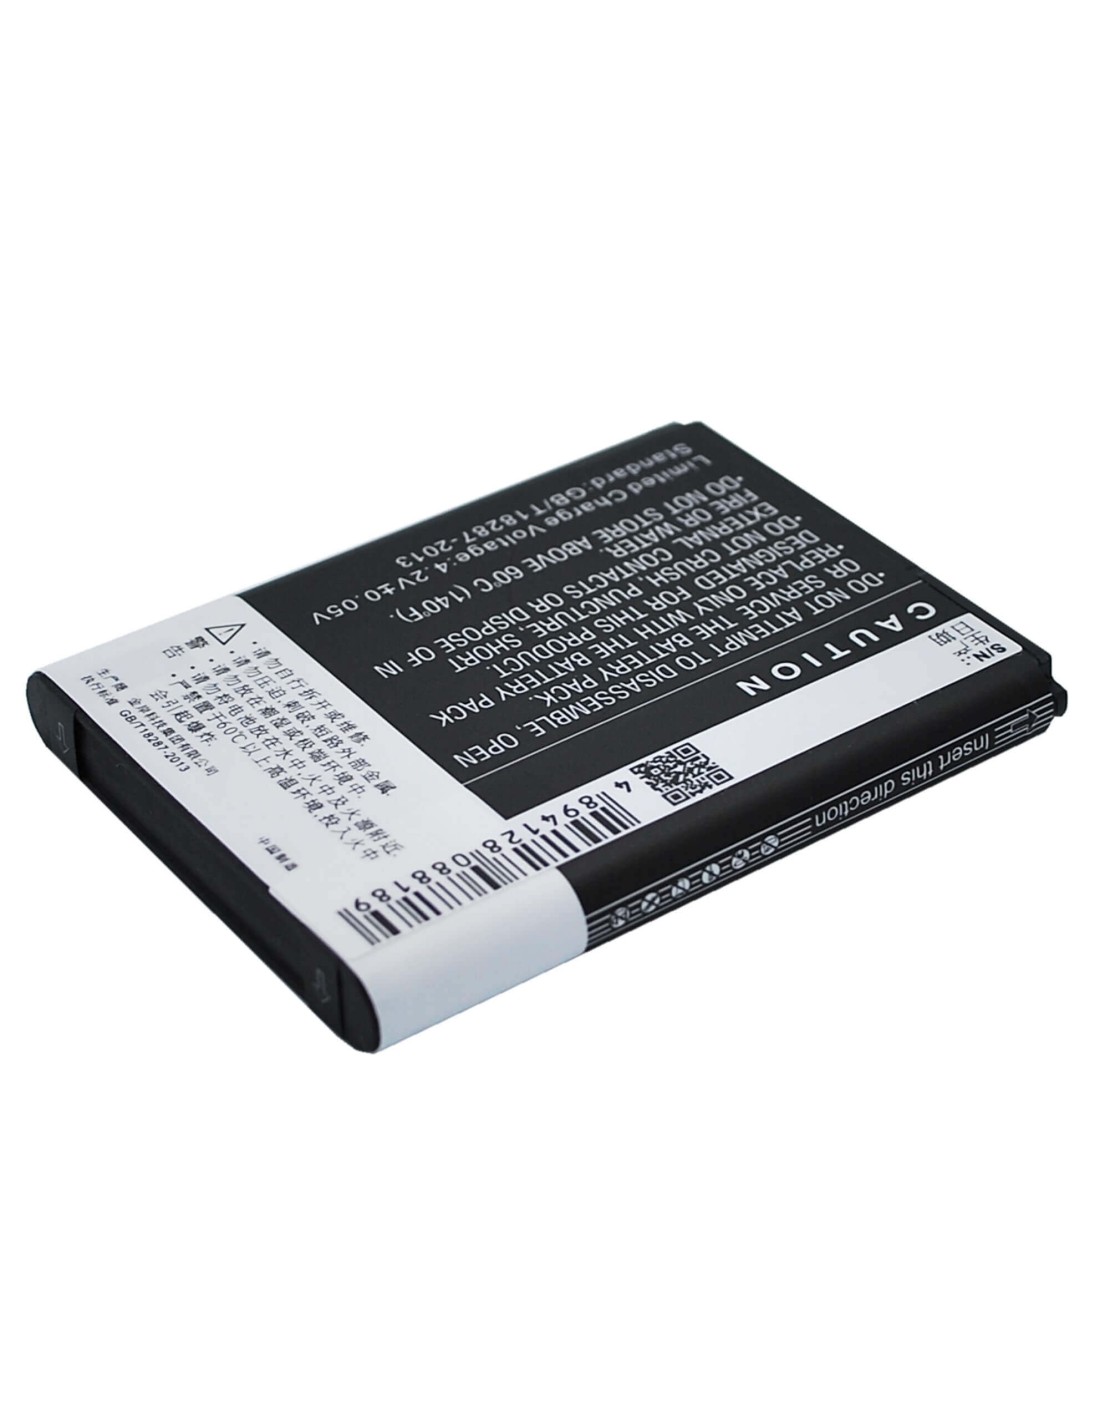 Battery for GIONEE A326, A809, GN787 3.7V, 2050mAh - 7.59Wh